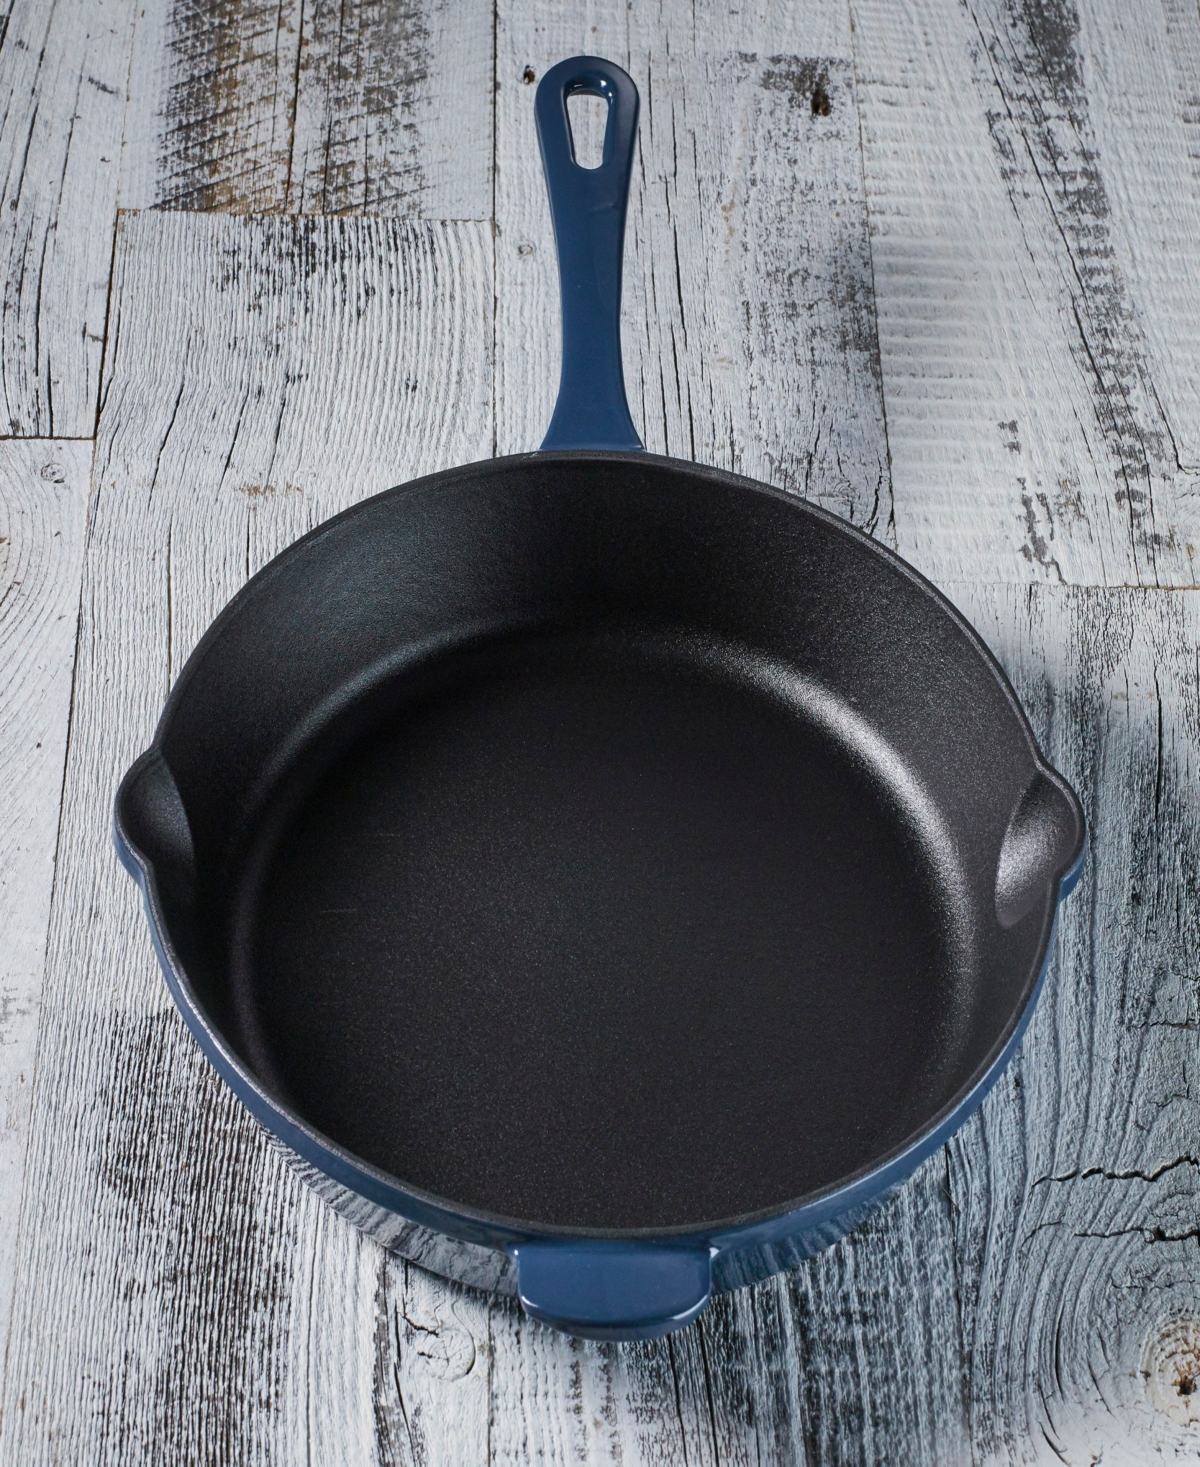 Cuisinart Chefs Classic Enameled Cast Iron 10" Skillet In Provencal Blue